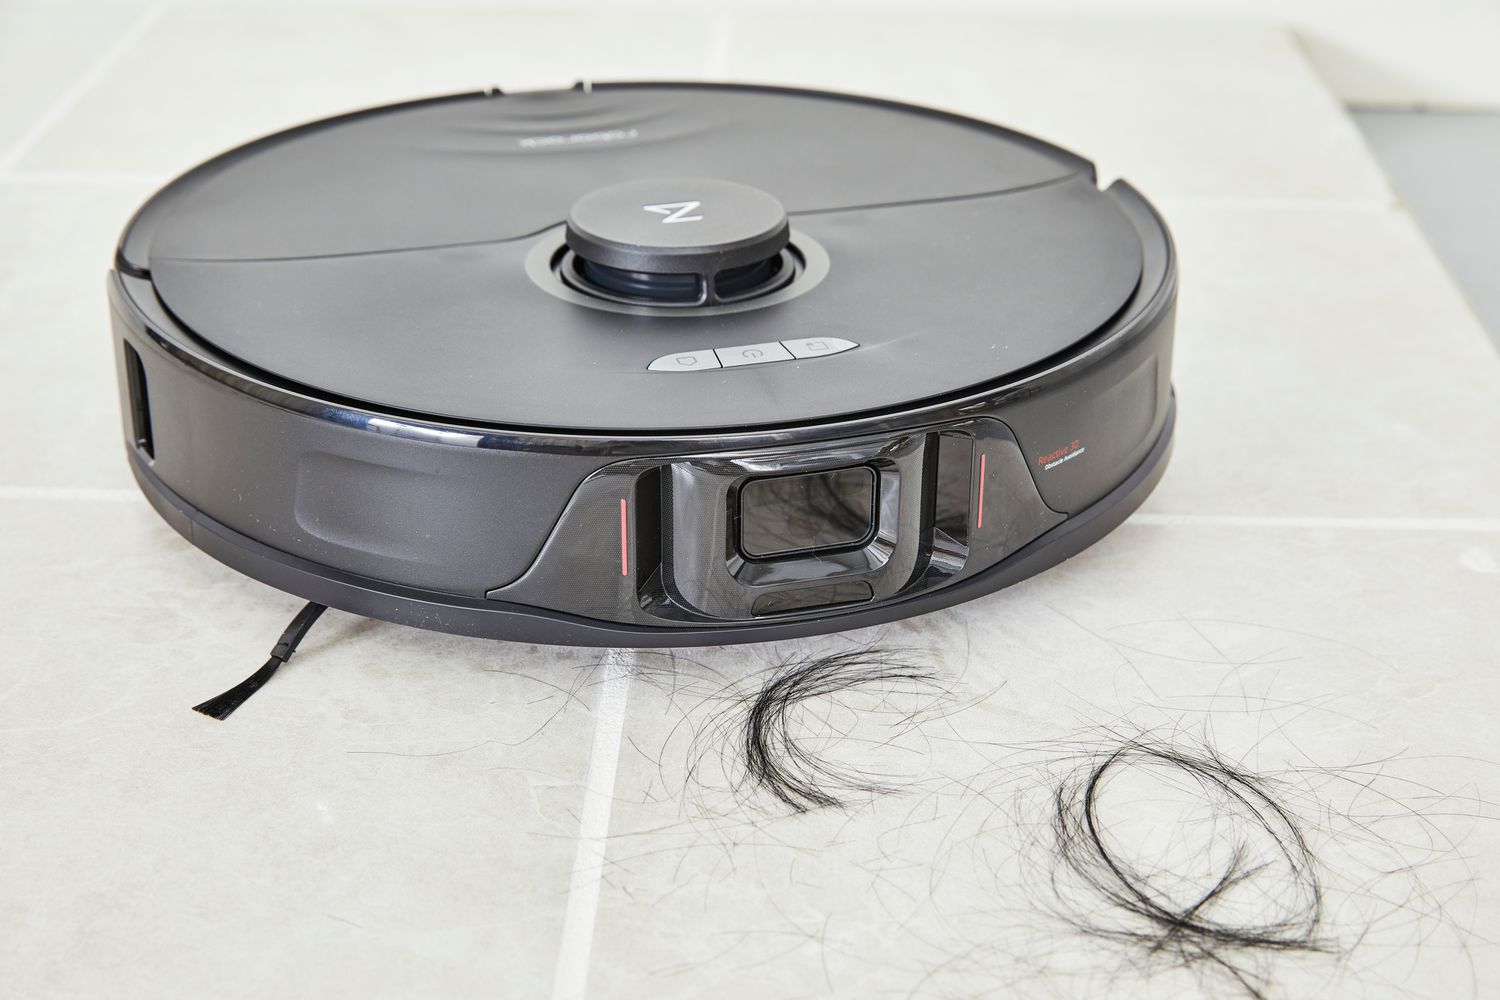 The Roborock S8 Plus cleans hair from a tile floor